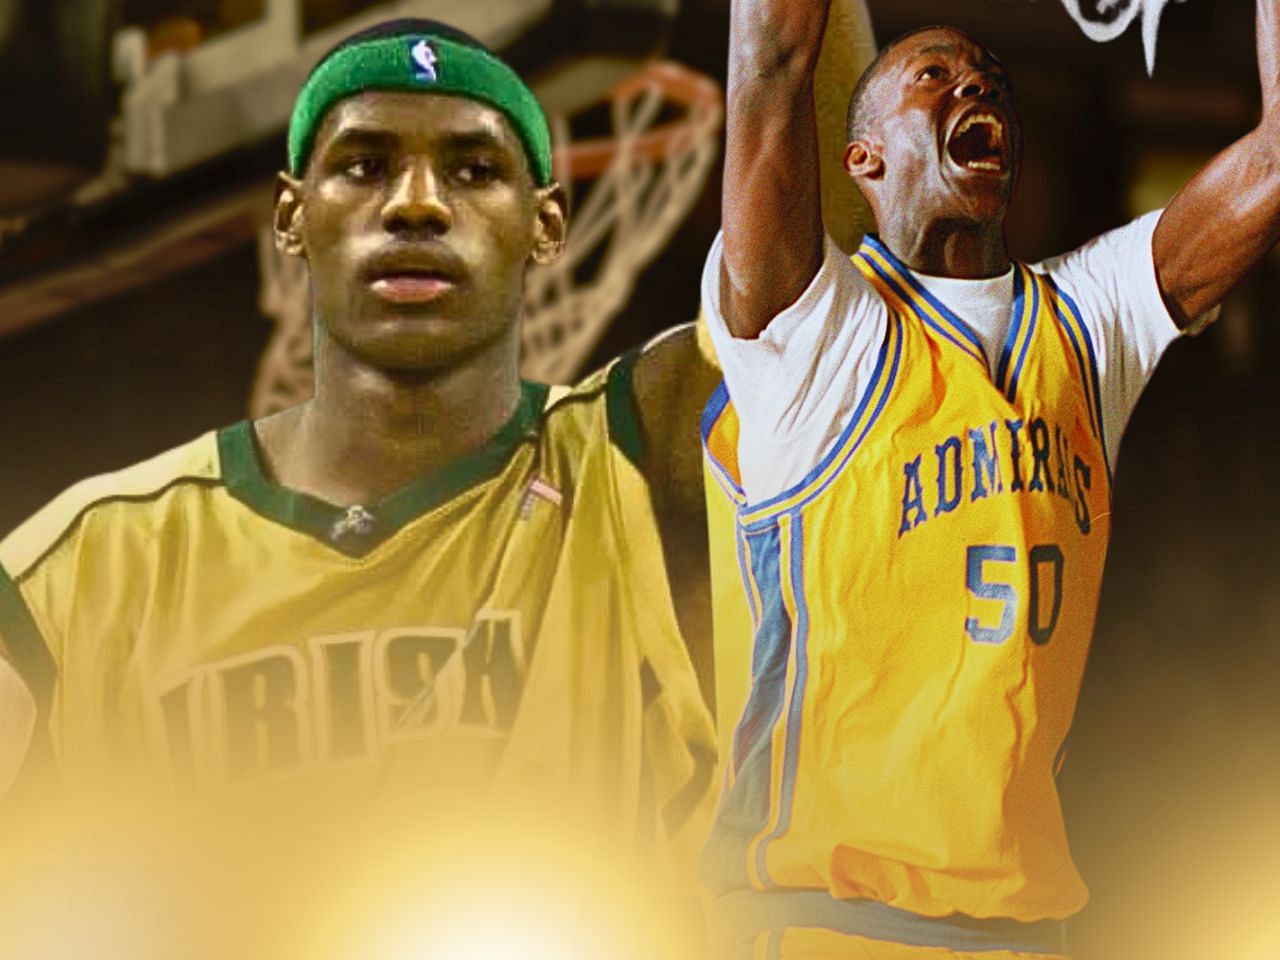 Looking at LeBron James, Kobe Bryant, Kevin Garnett, and other NBA stars drafted out of high school